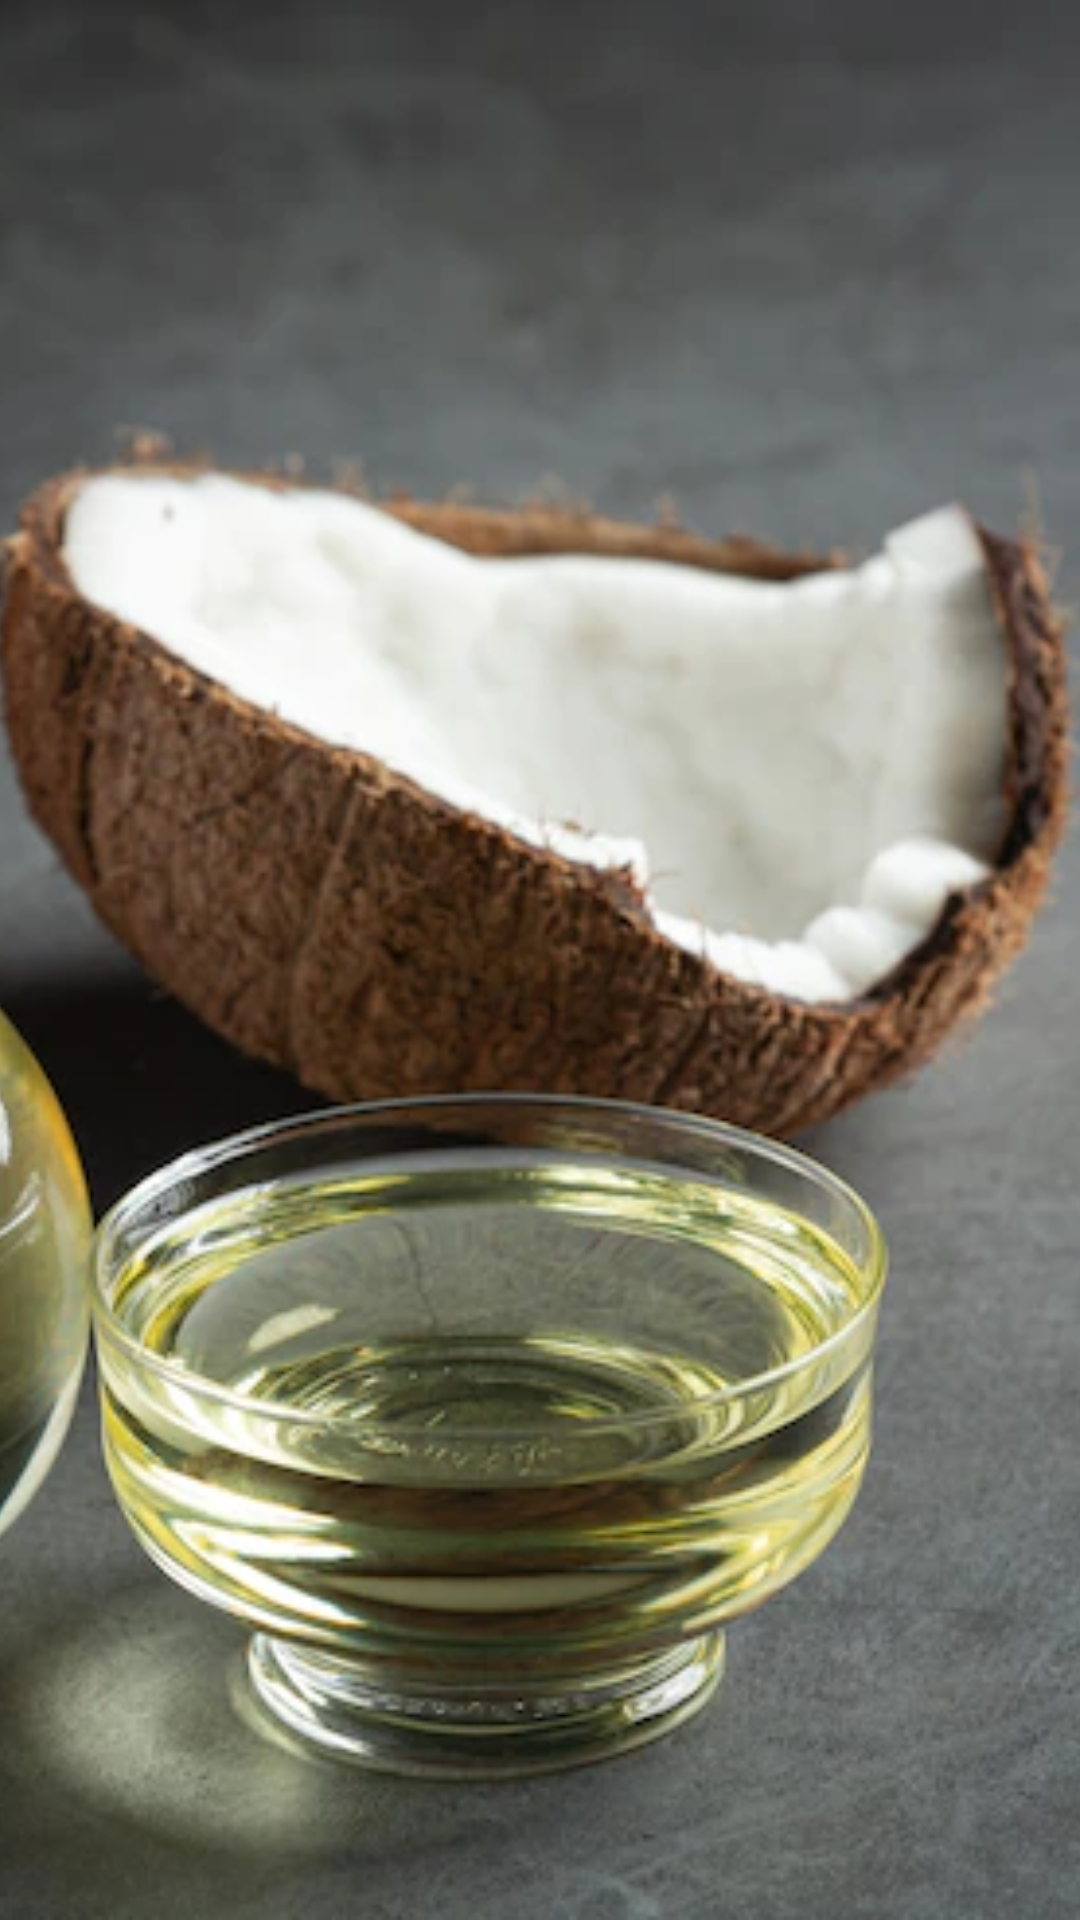 10 uses of coconut oil to benefit your hair, skin and health